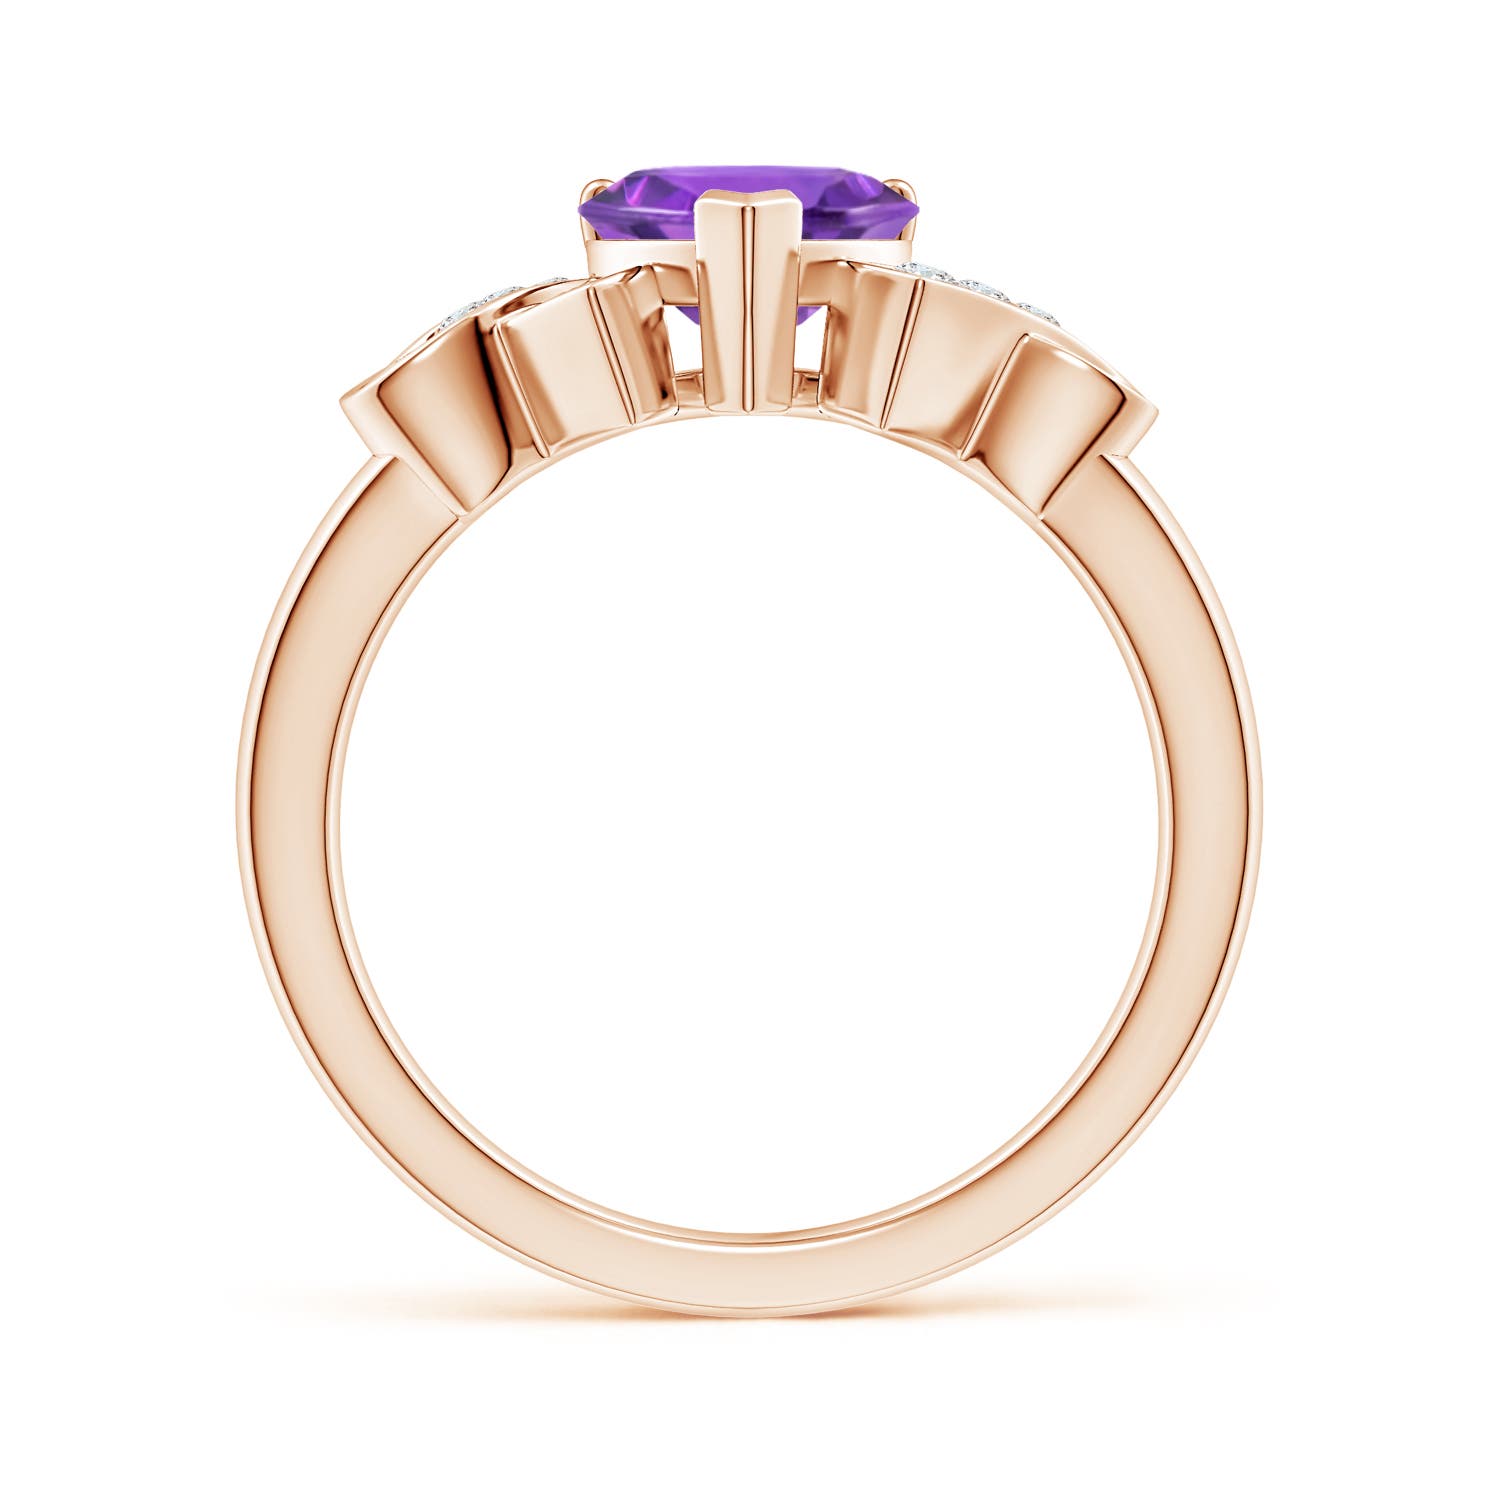 AAA - Amethyst / 1.17 CT / 14 KT Rose Gold